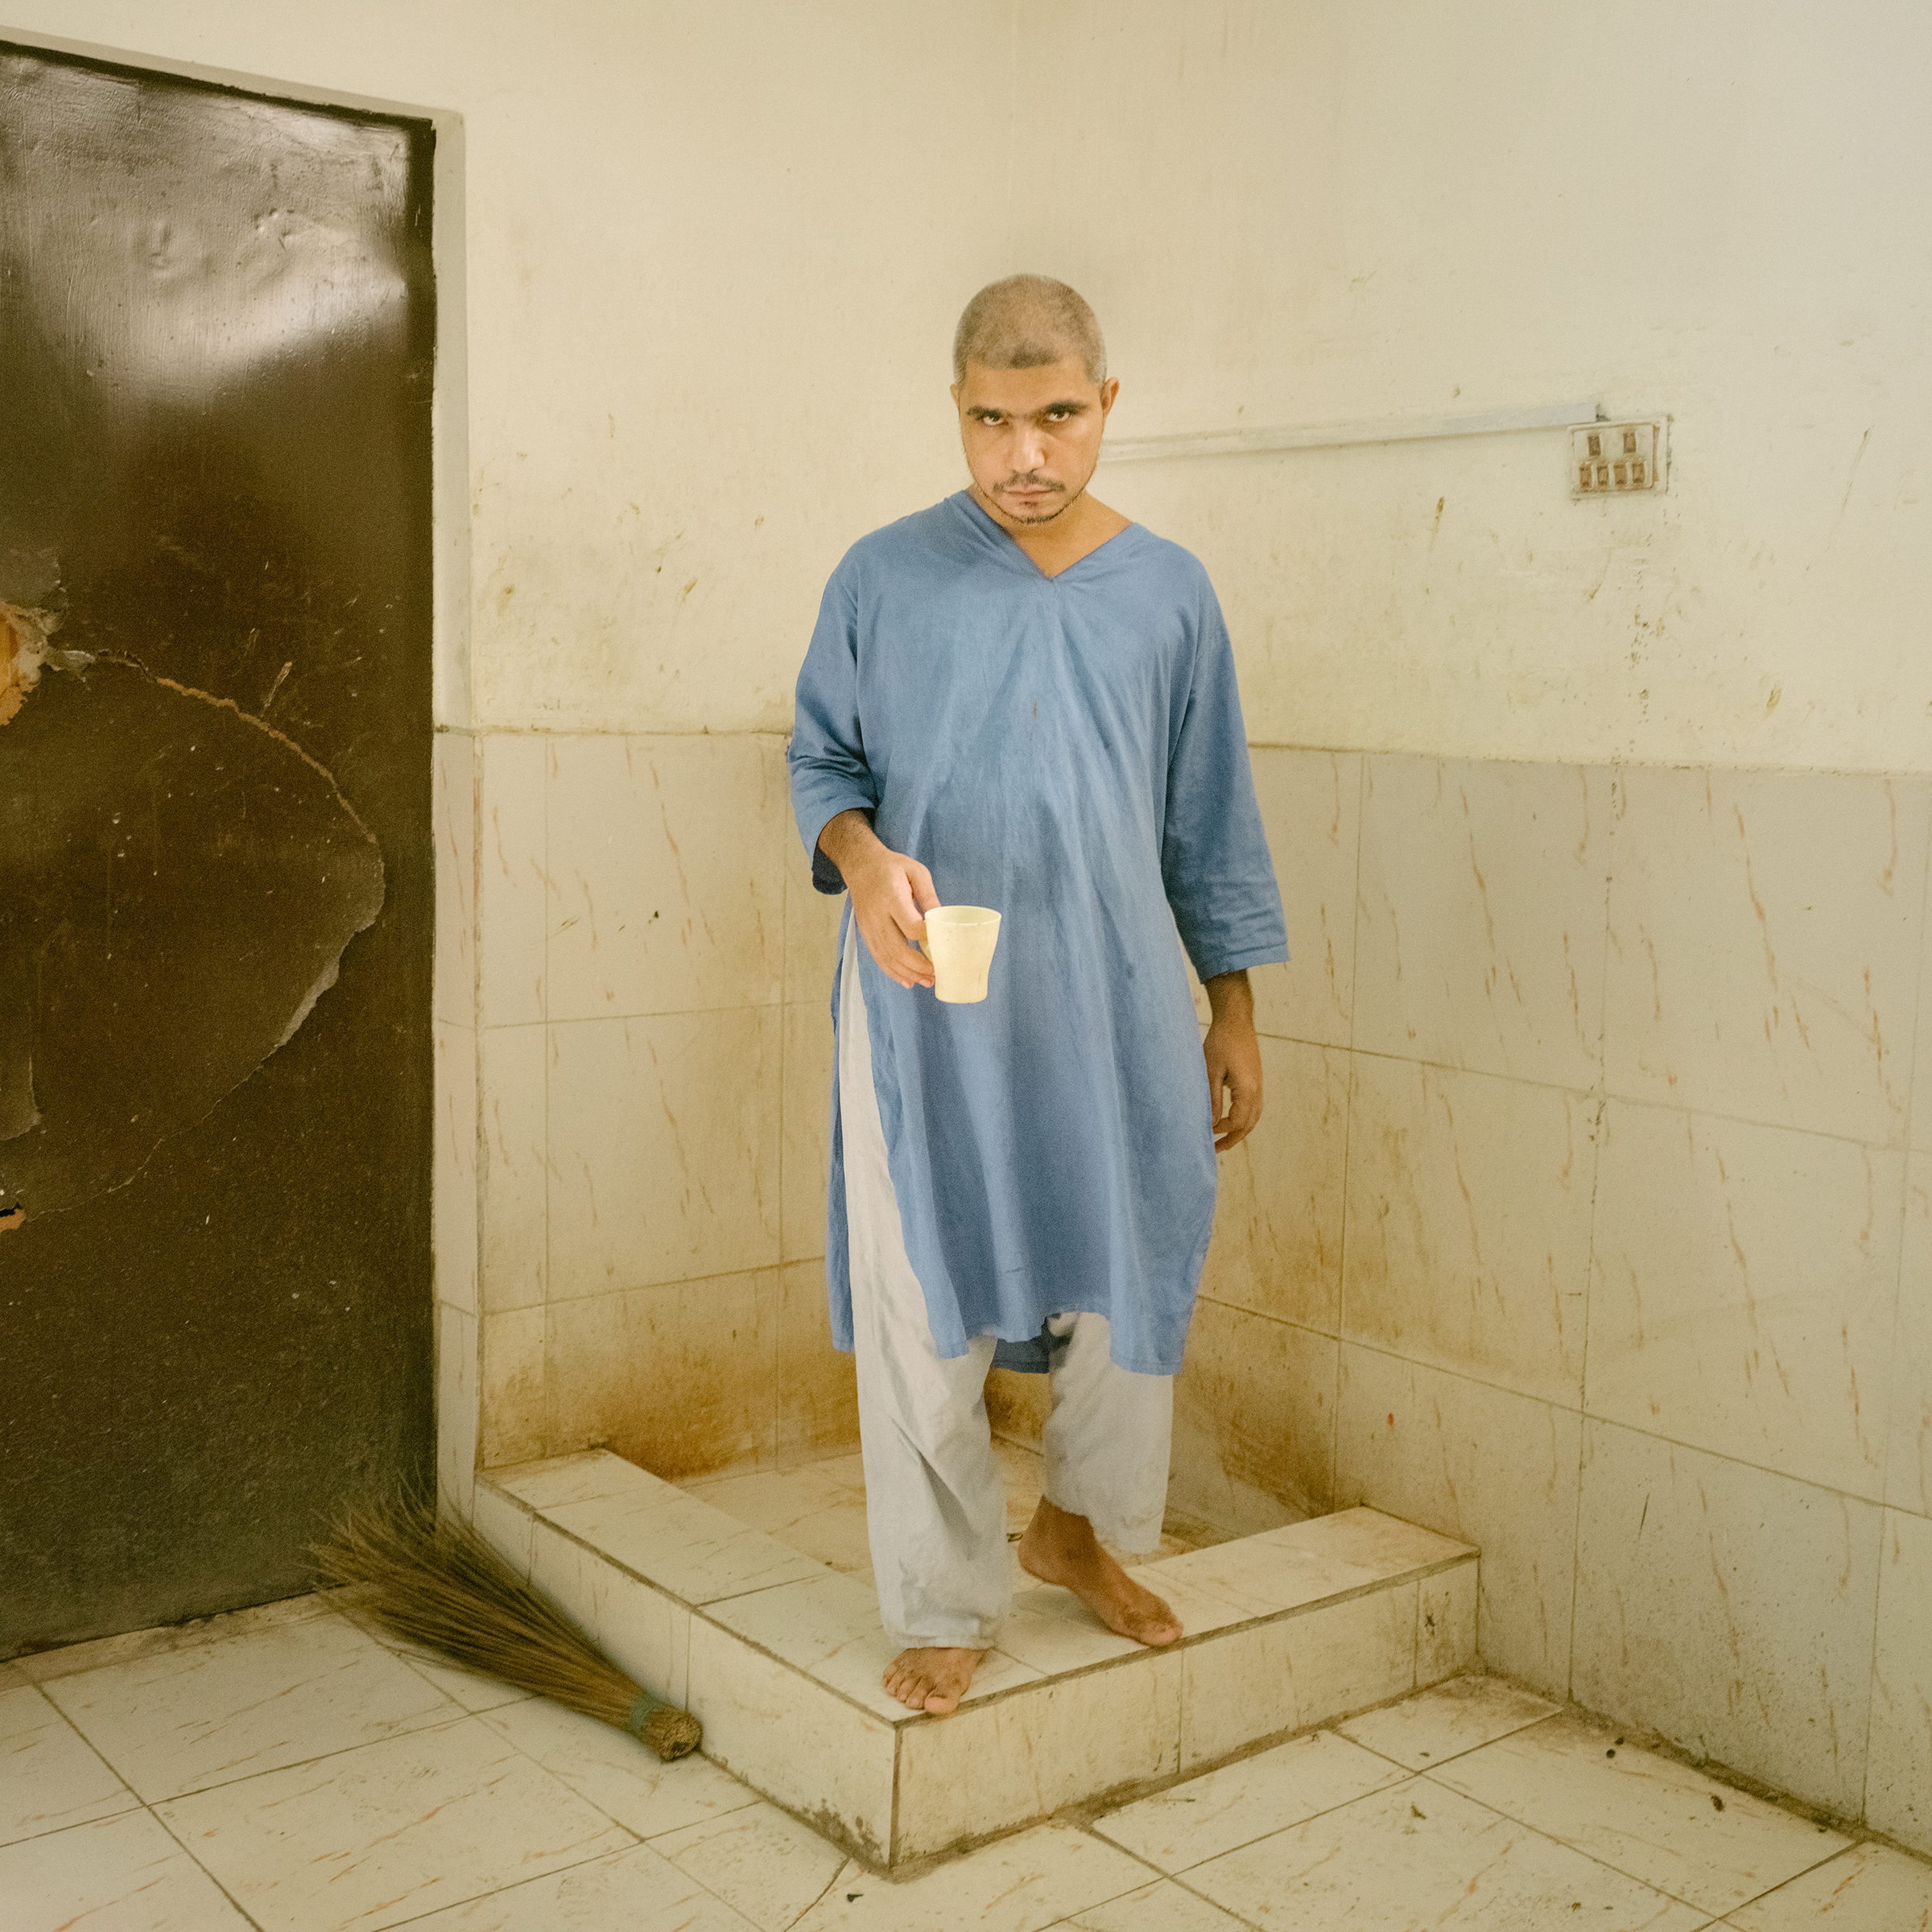 A patient retrieves water at a mental asylum in Hyderabad, south of Jacobabad, on July 2. (Matthieu Paley for TIME)